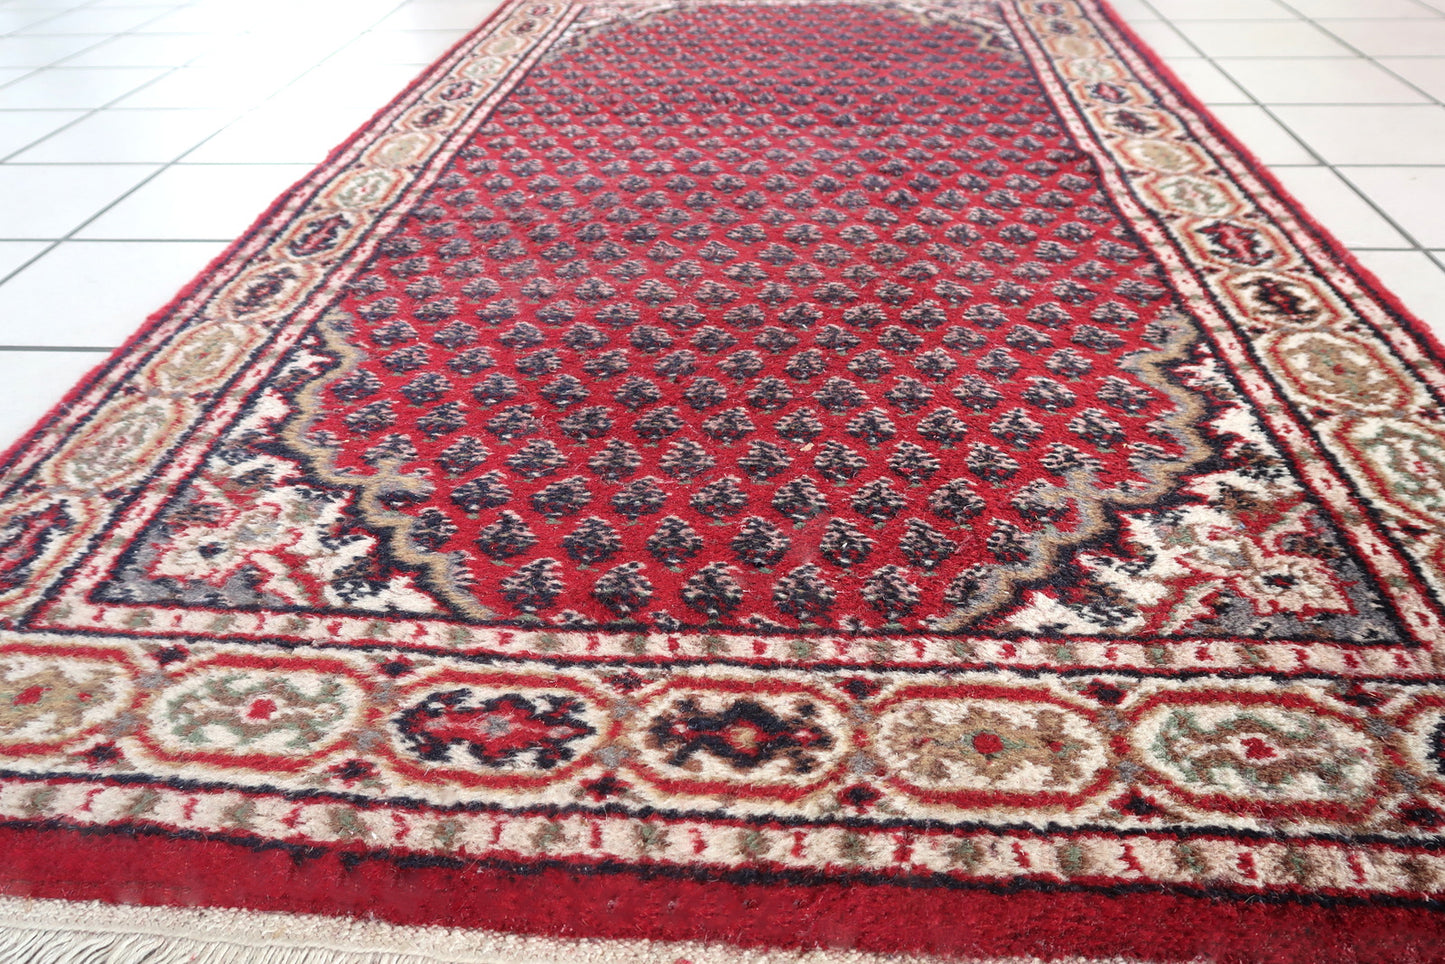 Handmade vintage Indian Seraband rug in traditional all-over design. The rug is form the end of 20th century in original good condition.